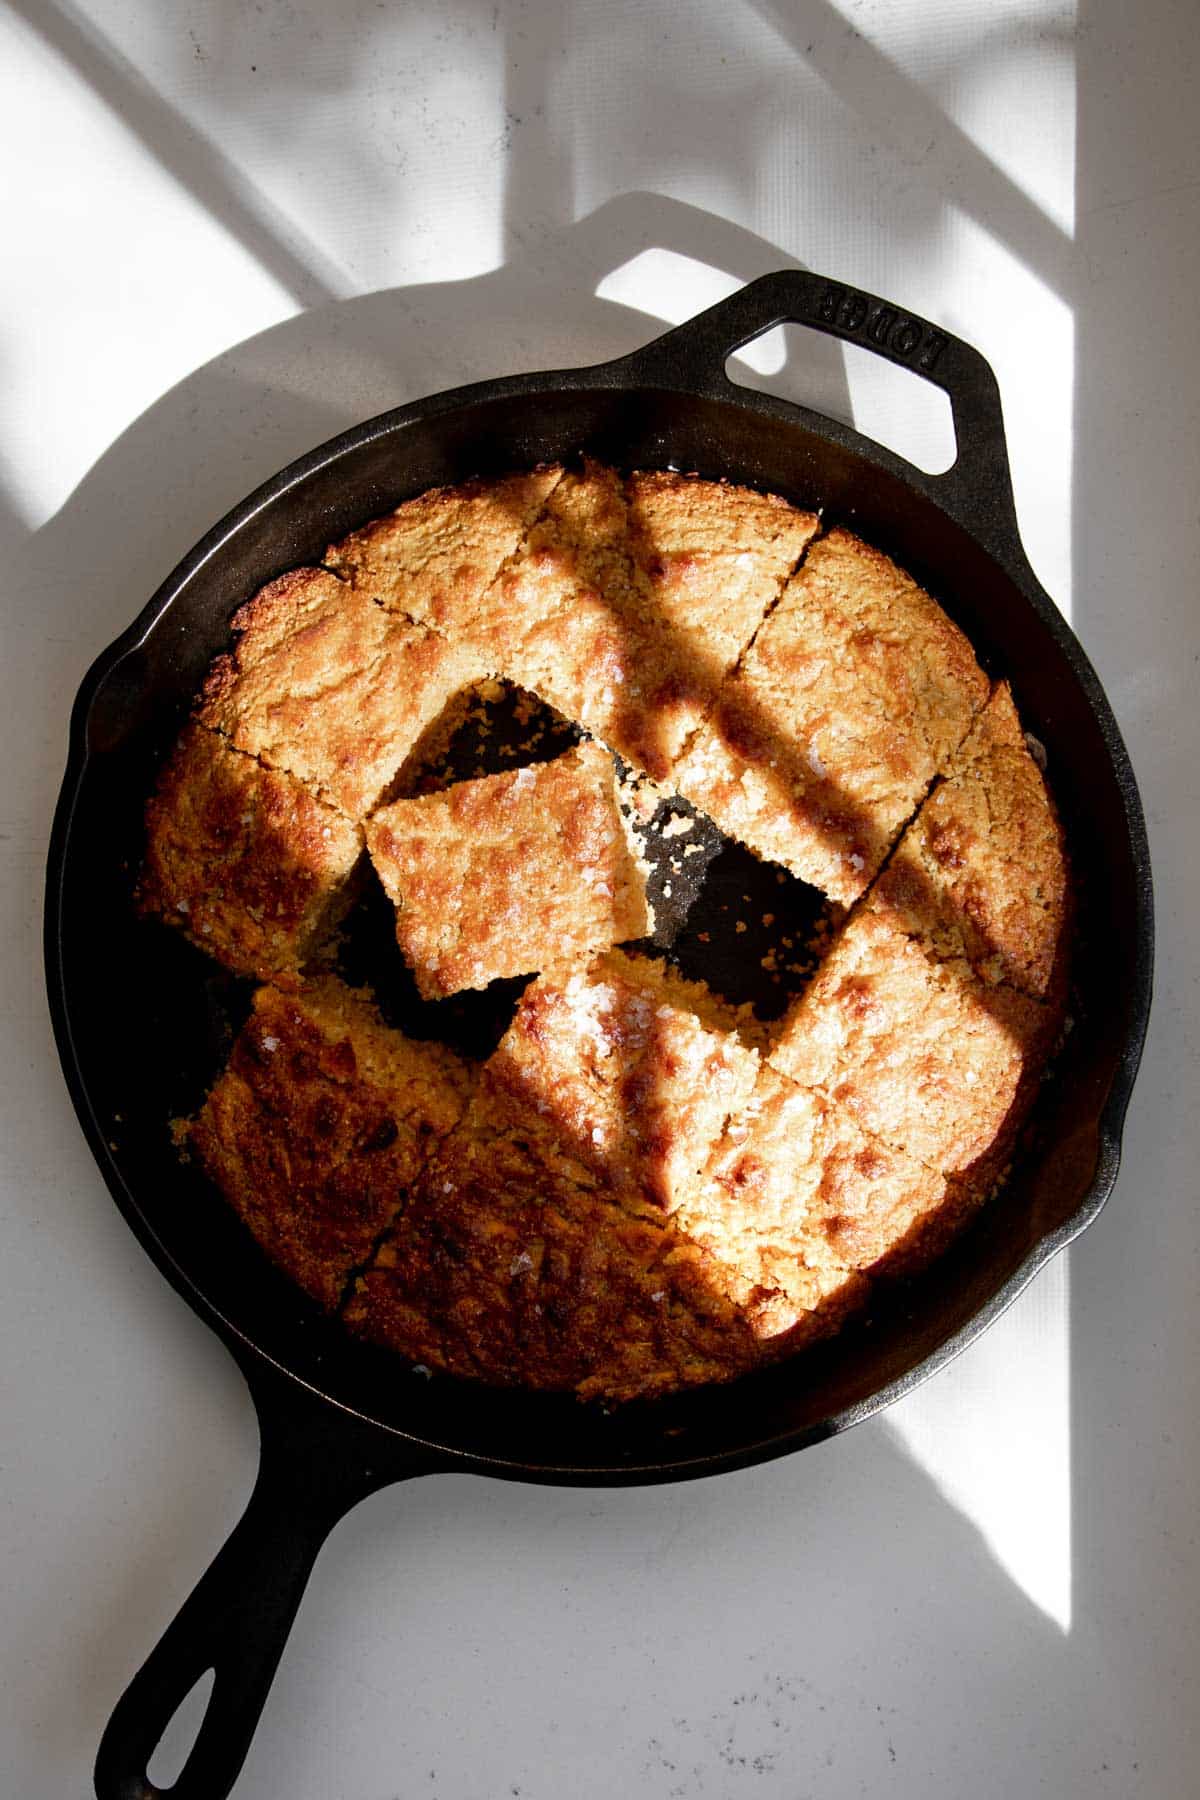 Cornbread cut in squares in a cast iron skillet with shadows casting overtop.